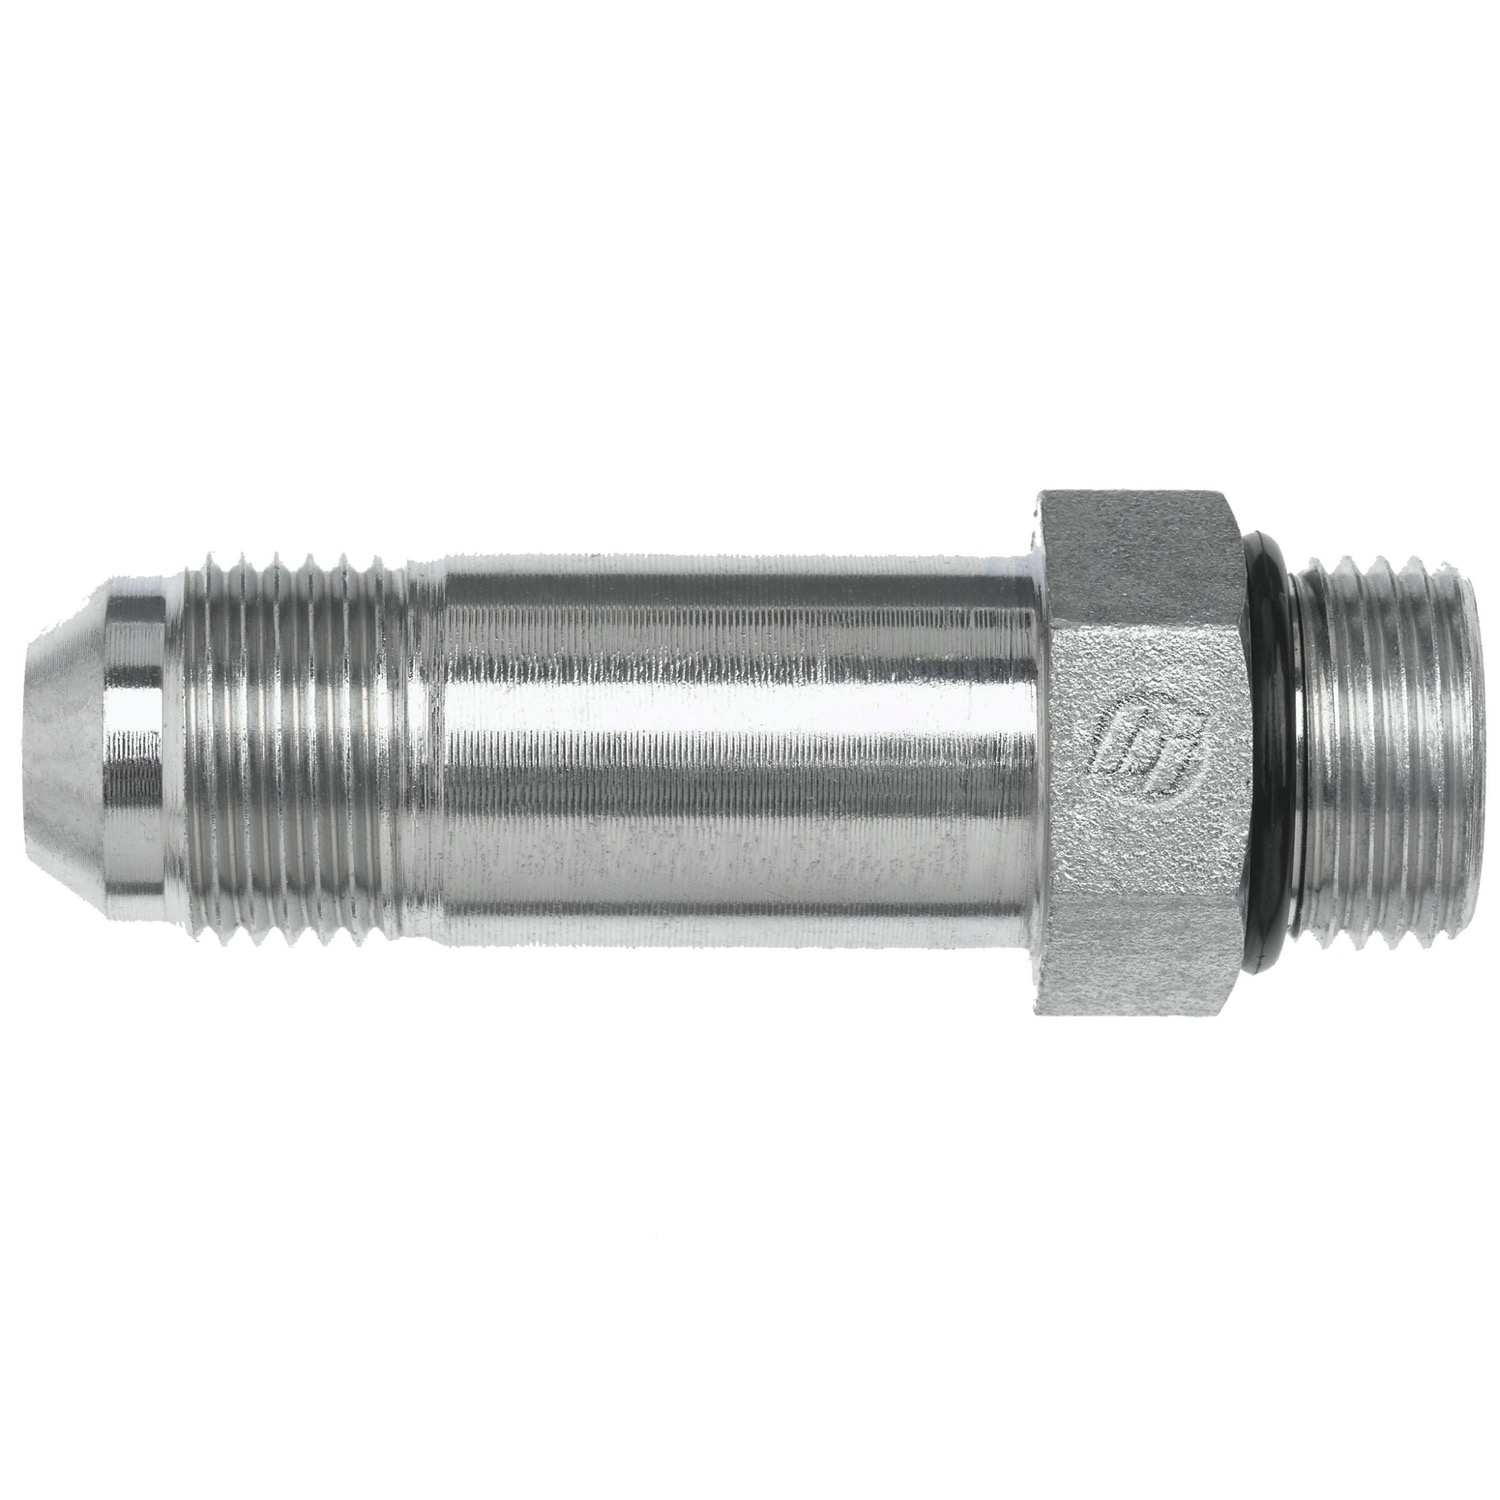 Hydraulic Hose Adapters - Straight Long Fitting, O-Ring Boss to JIC 37° Flare, 6400-L-0 Series